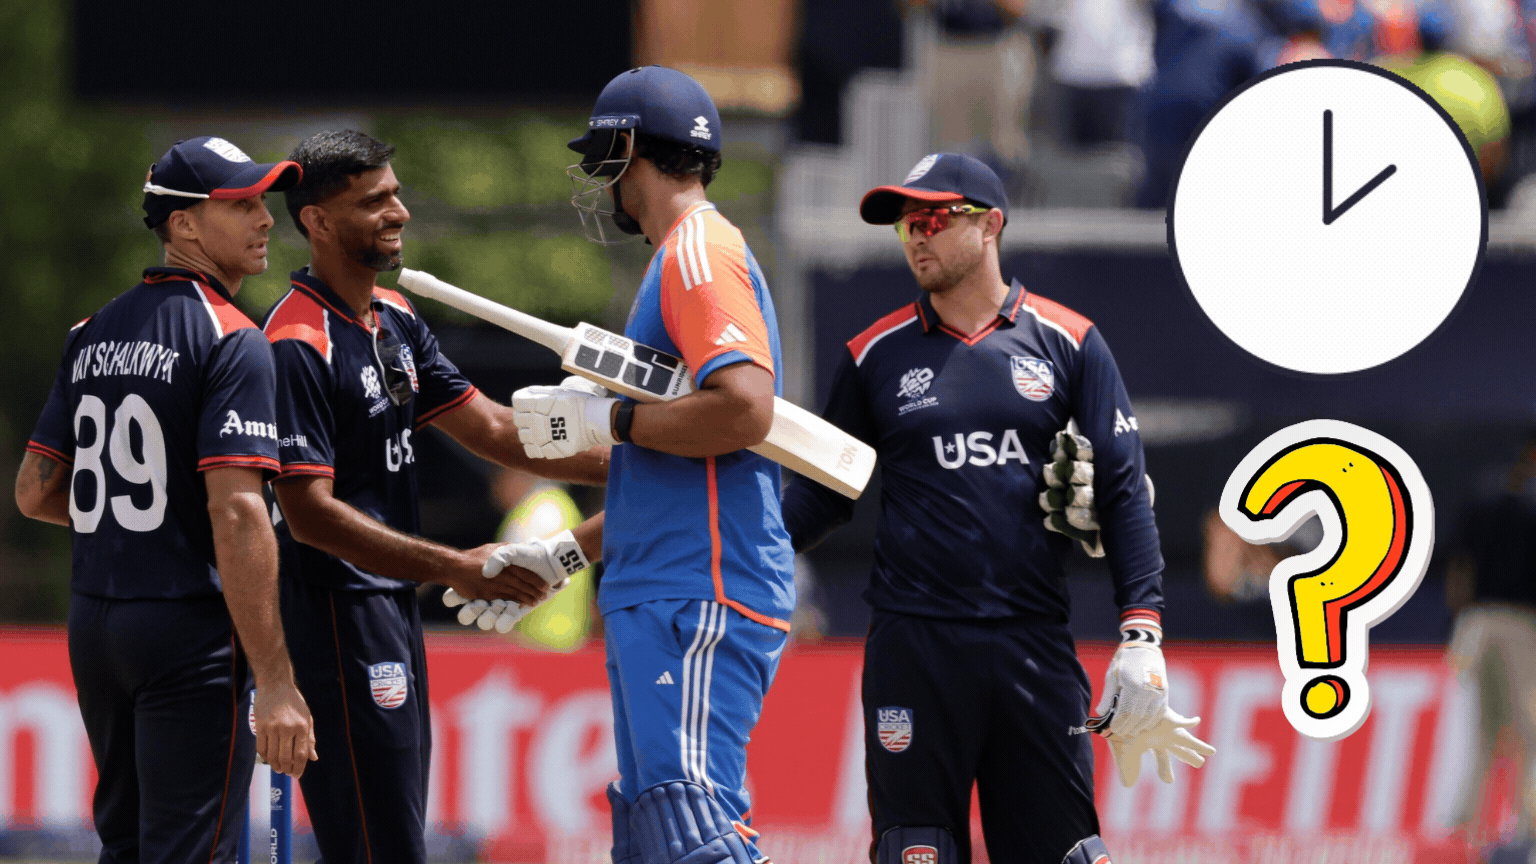 <div class="paragraphs"><p>Explained: USA were penalised 5 runs vs India under the Stop Clock Rule – What Is It?</p></div>